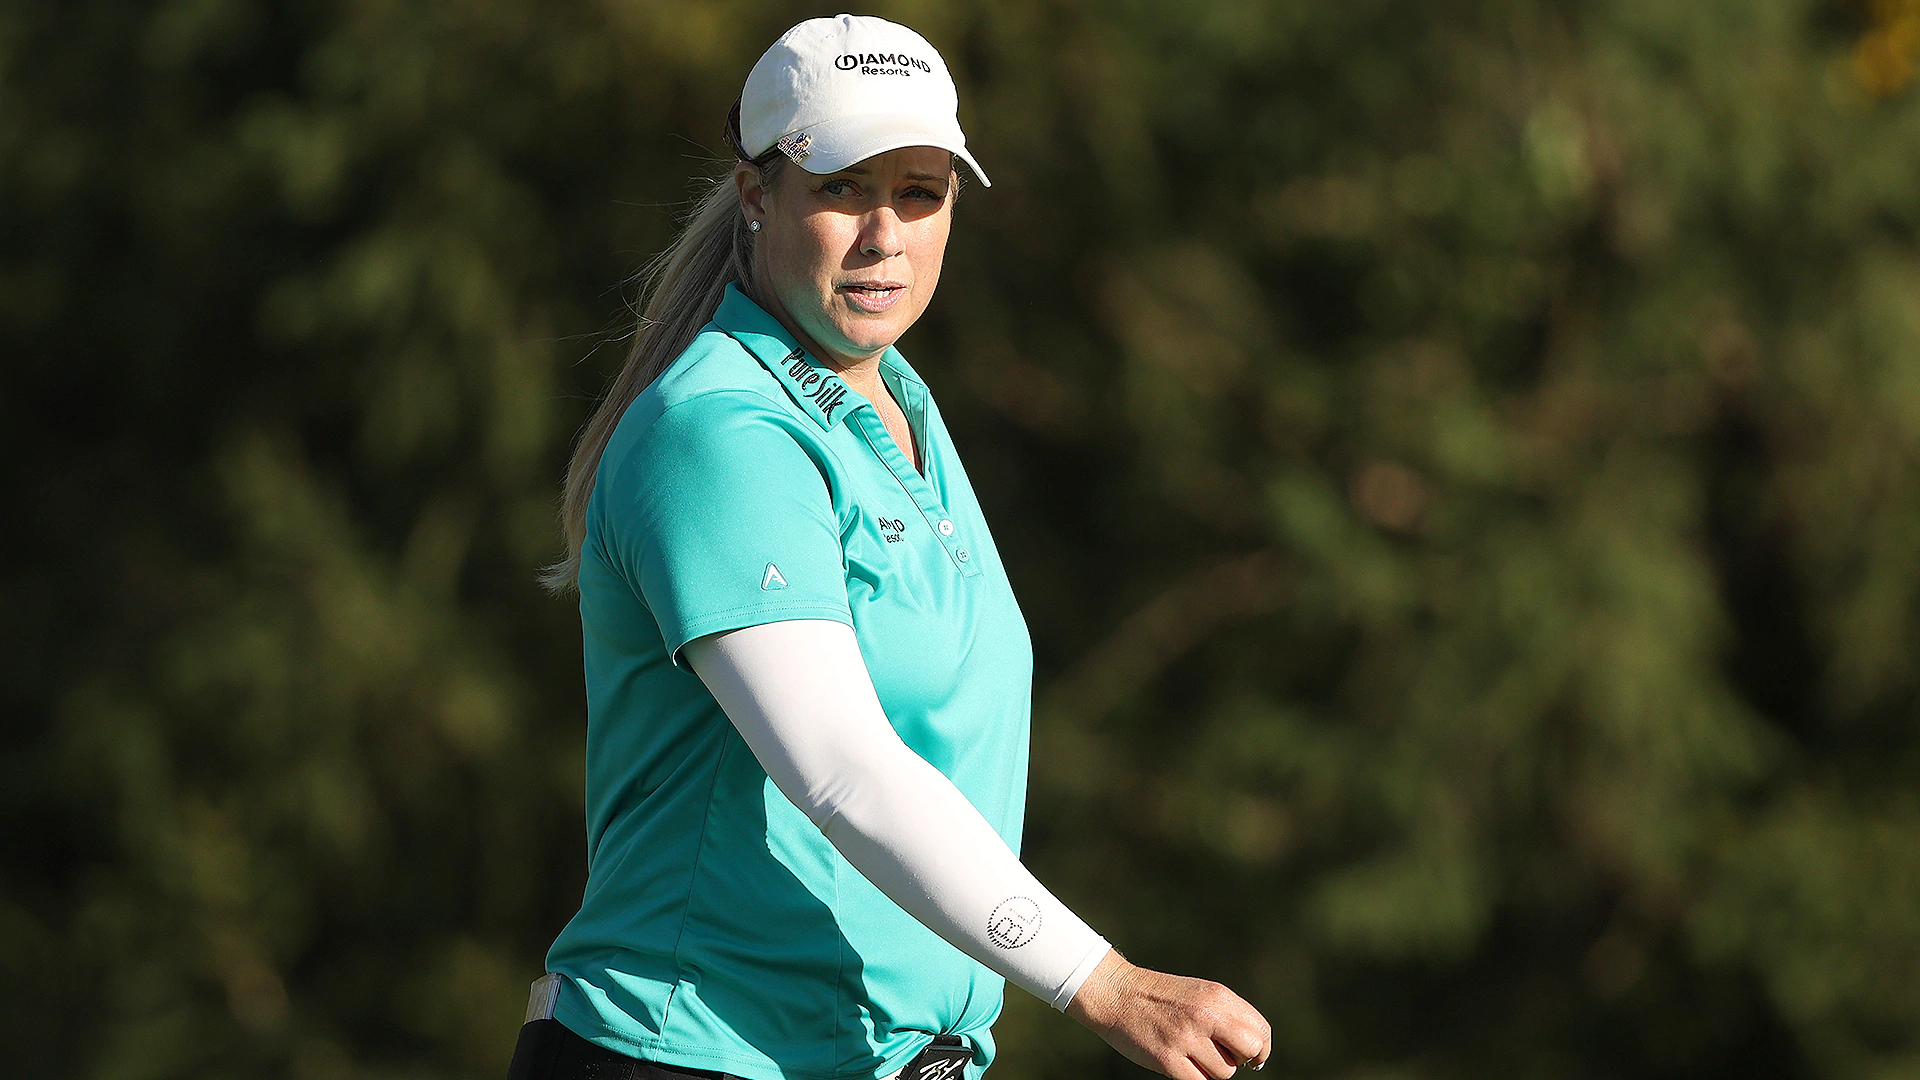 Brittany Lincicome withdraws from LPGA event after positive COVID-19 test